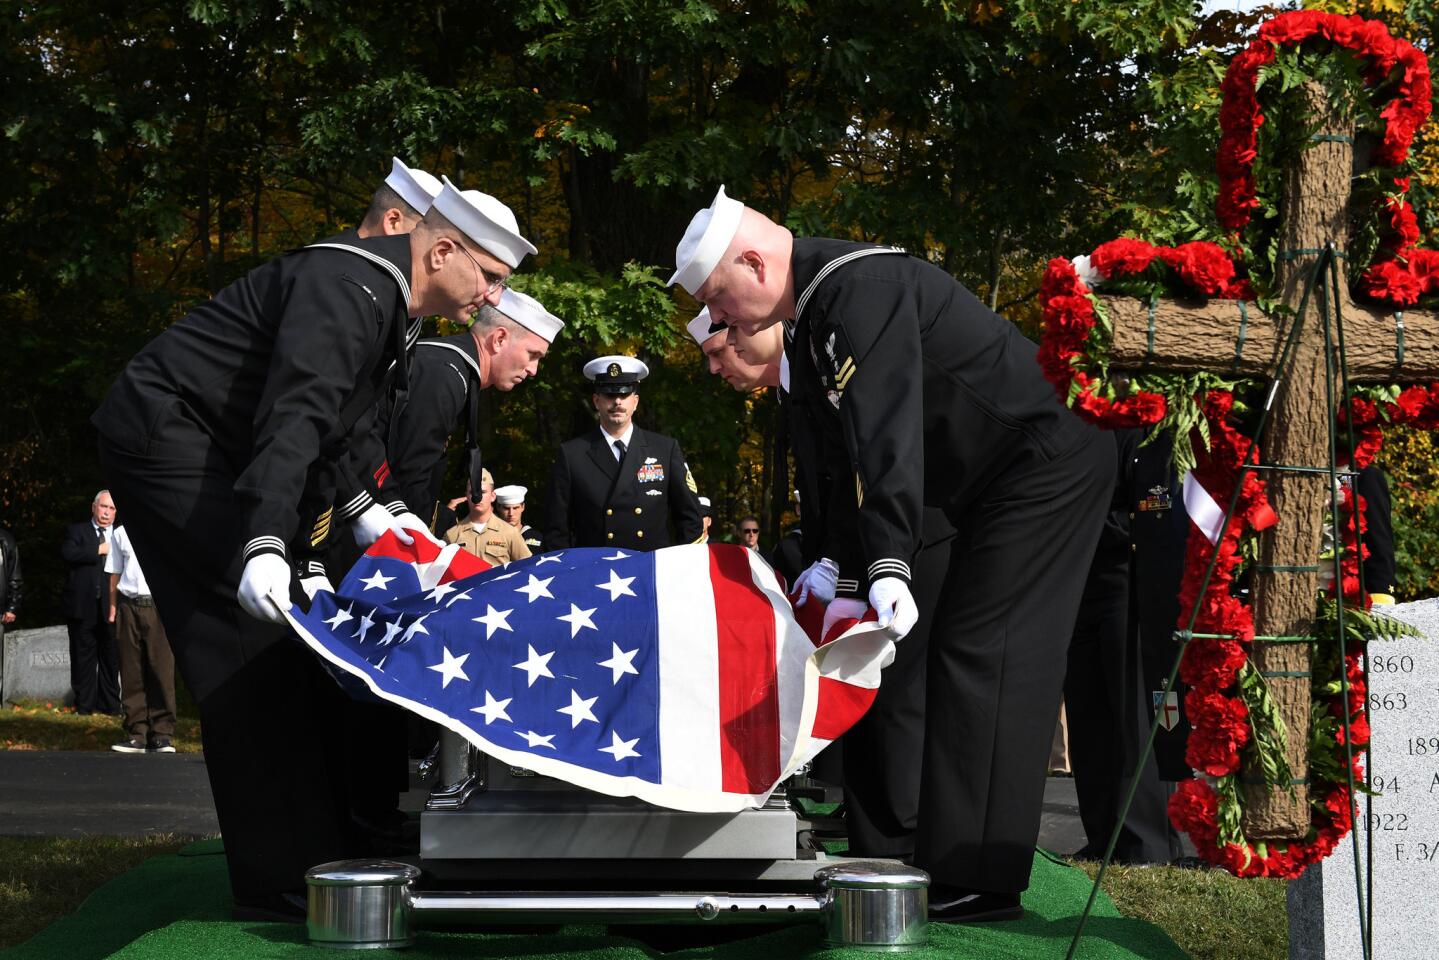 Pearl Harbor victim's remains returned to family for burial